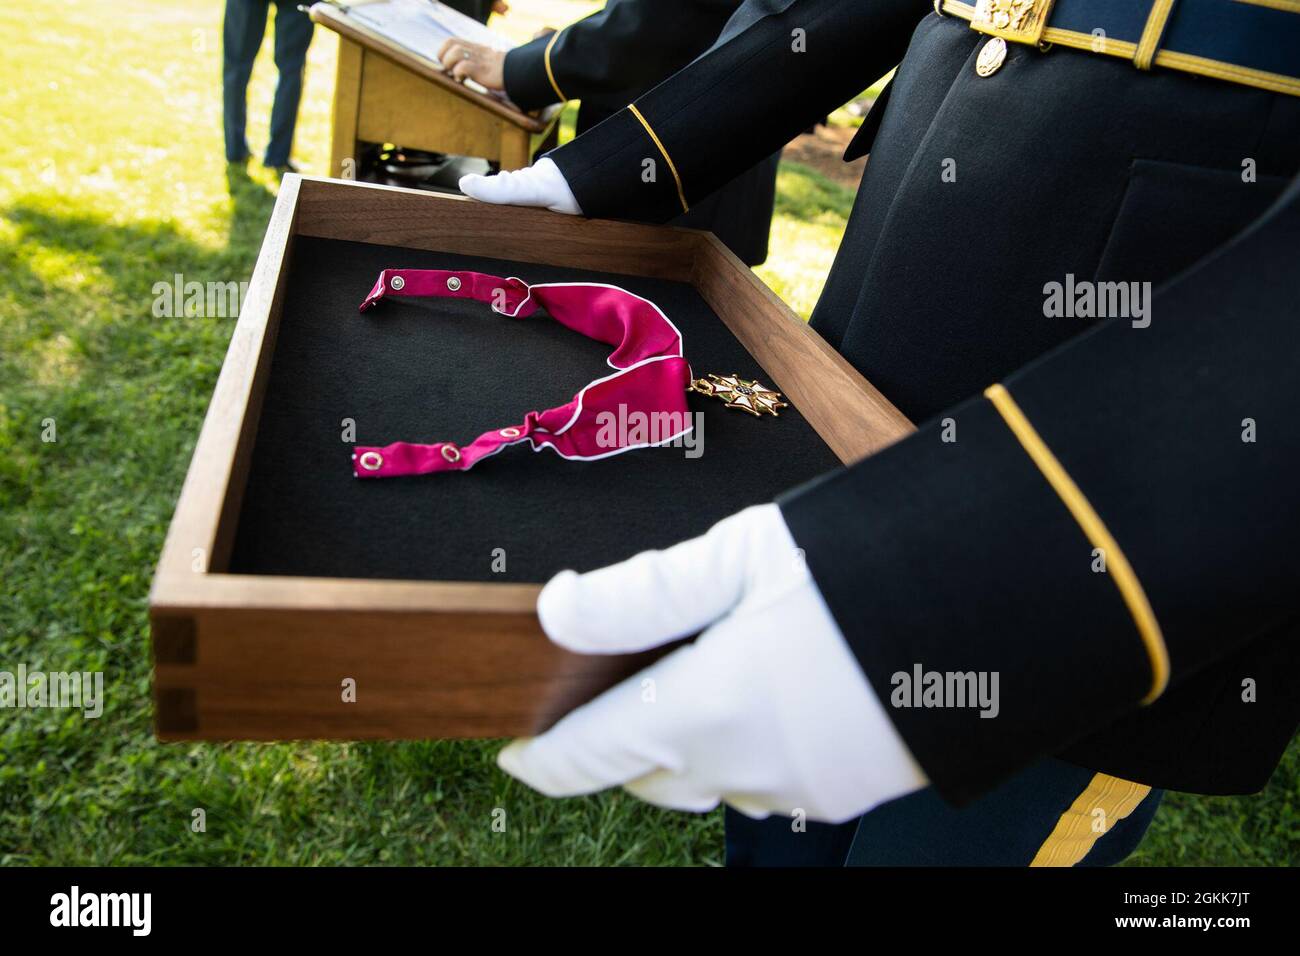 A U.S. Soldier assigned to the 3rd U.S. Infantry Regiment (The Old Guard) holds a Legion of Merit medal during an Army Full Honor Arrival Ceremony at Whipple Field, Joint Base Myer-Henderson Hall, Arlington, Va., May 13, 2021. The medal was awarded to General Sir Mark Alexander Carleton-Smith, the chief of the General Staff of the British Army, by Chief of Staff of the U.S. Army Gen. James C. McConville. Stock Photo